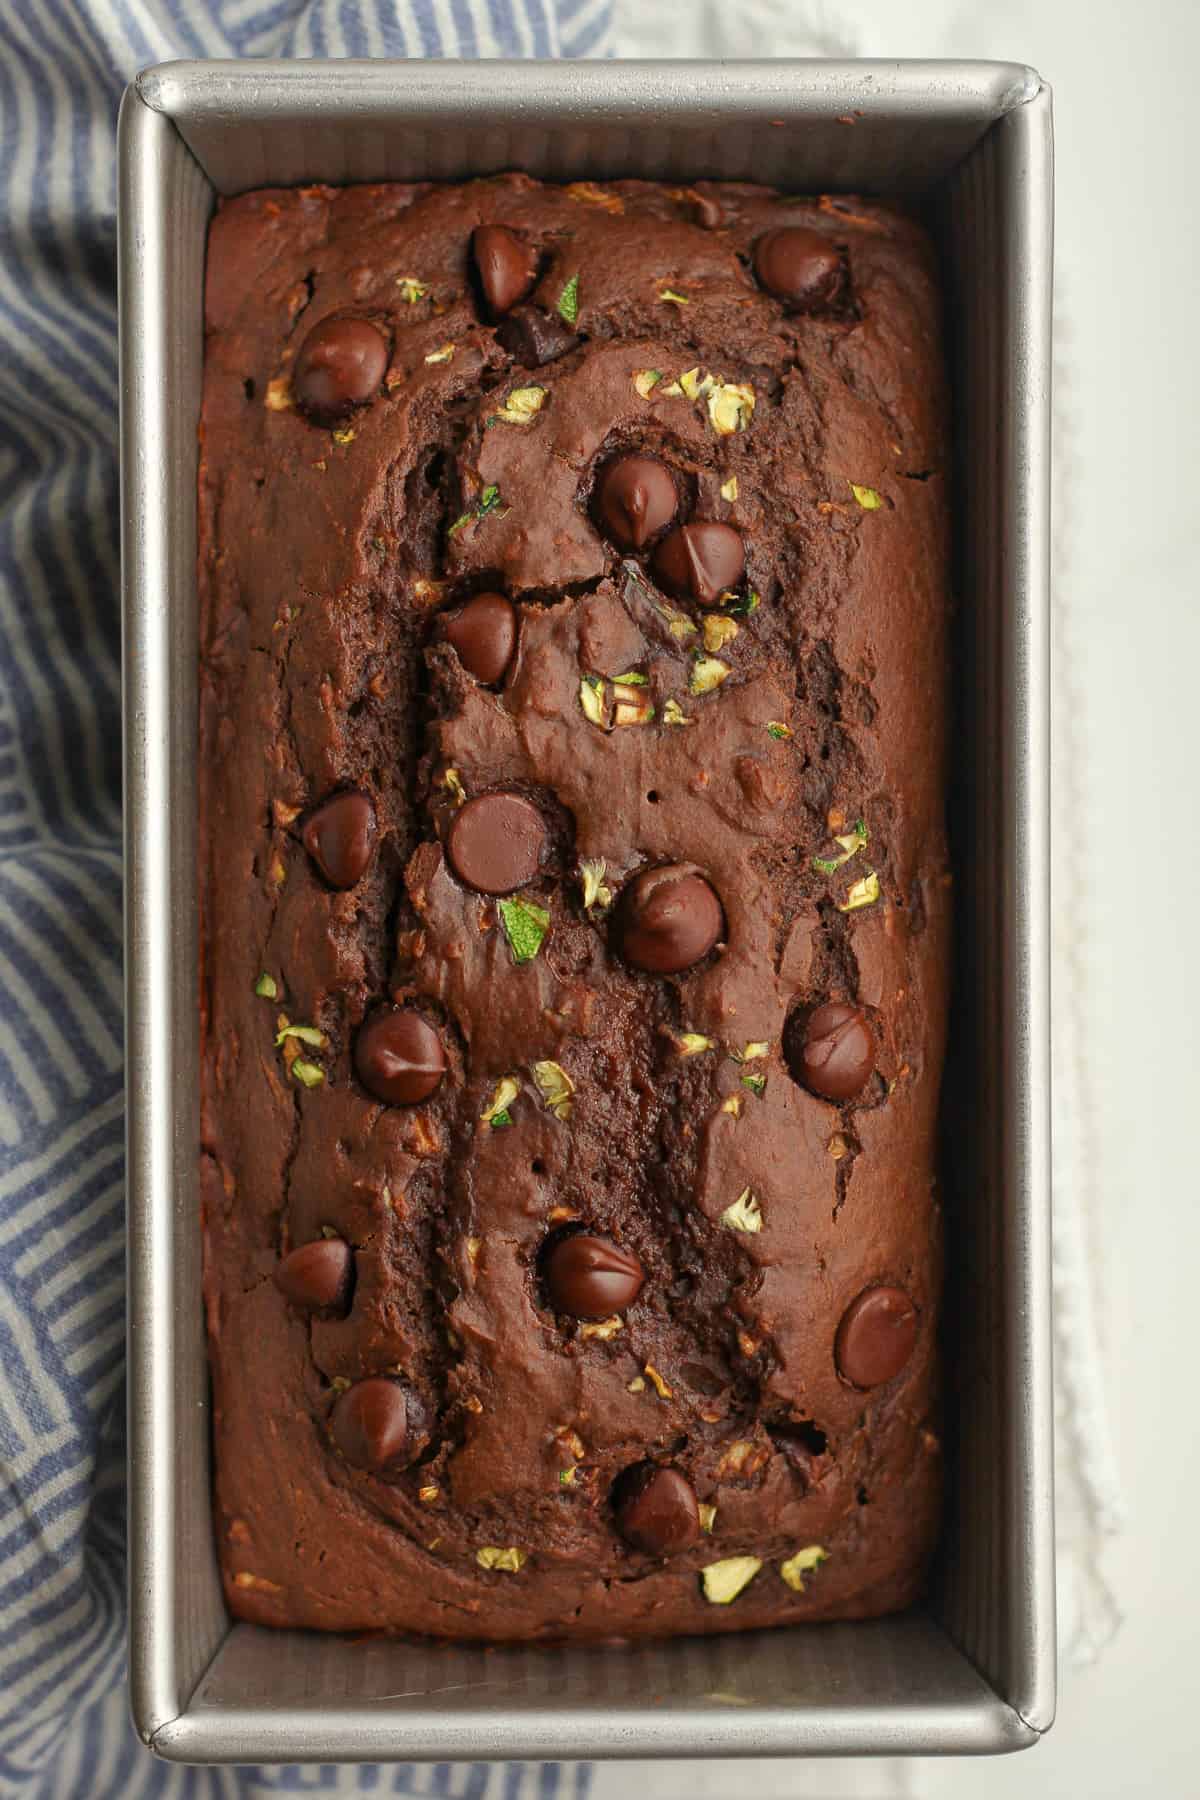 A loaf pan of chocolate zucchini bread.